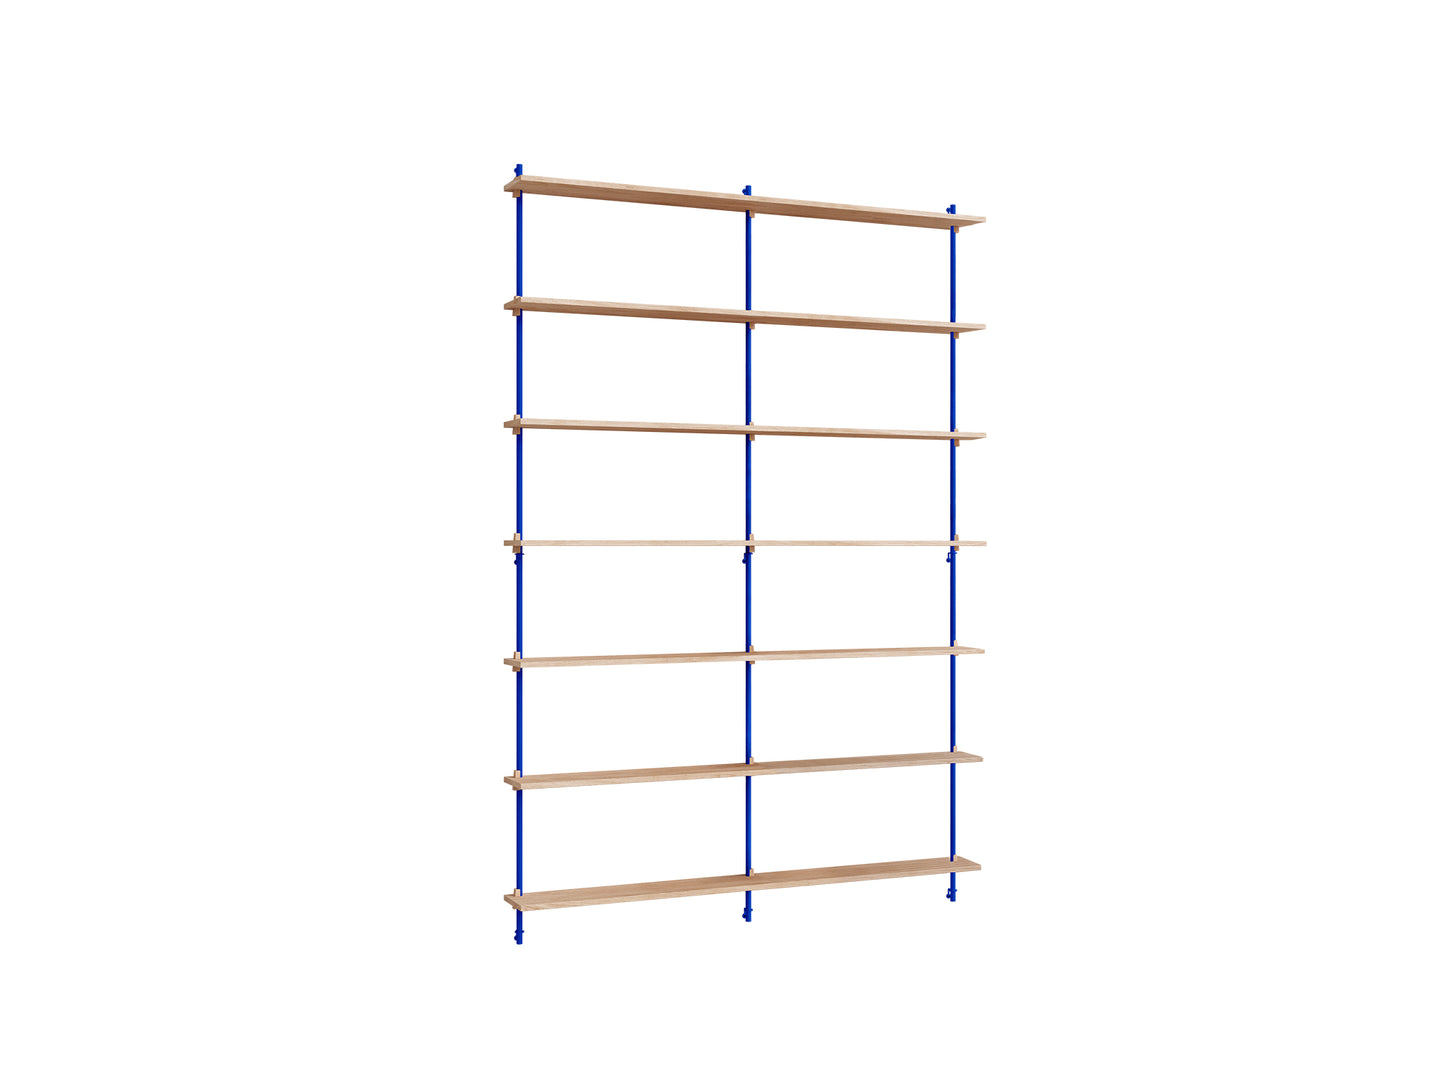 Wall Shelving System Sets (230 cm) by Moebe - WS.230.2.B / Deep Blue Uprights / Oiled Oak